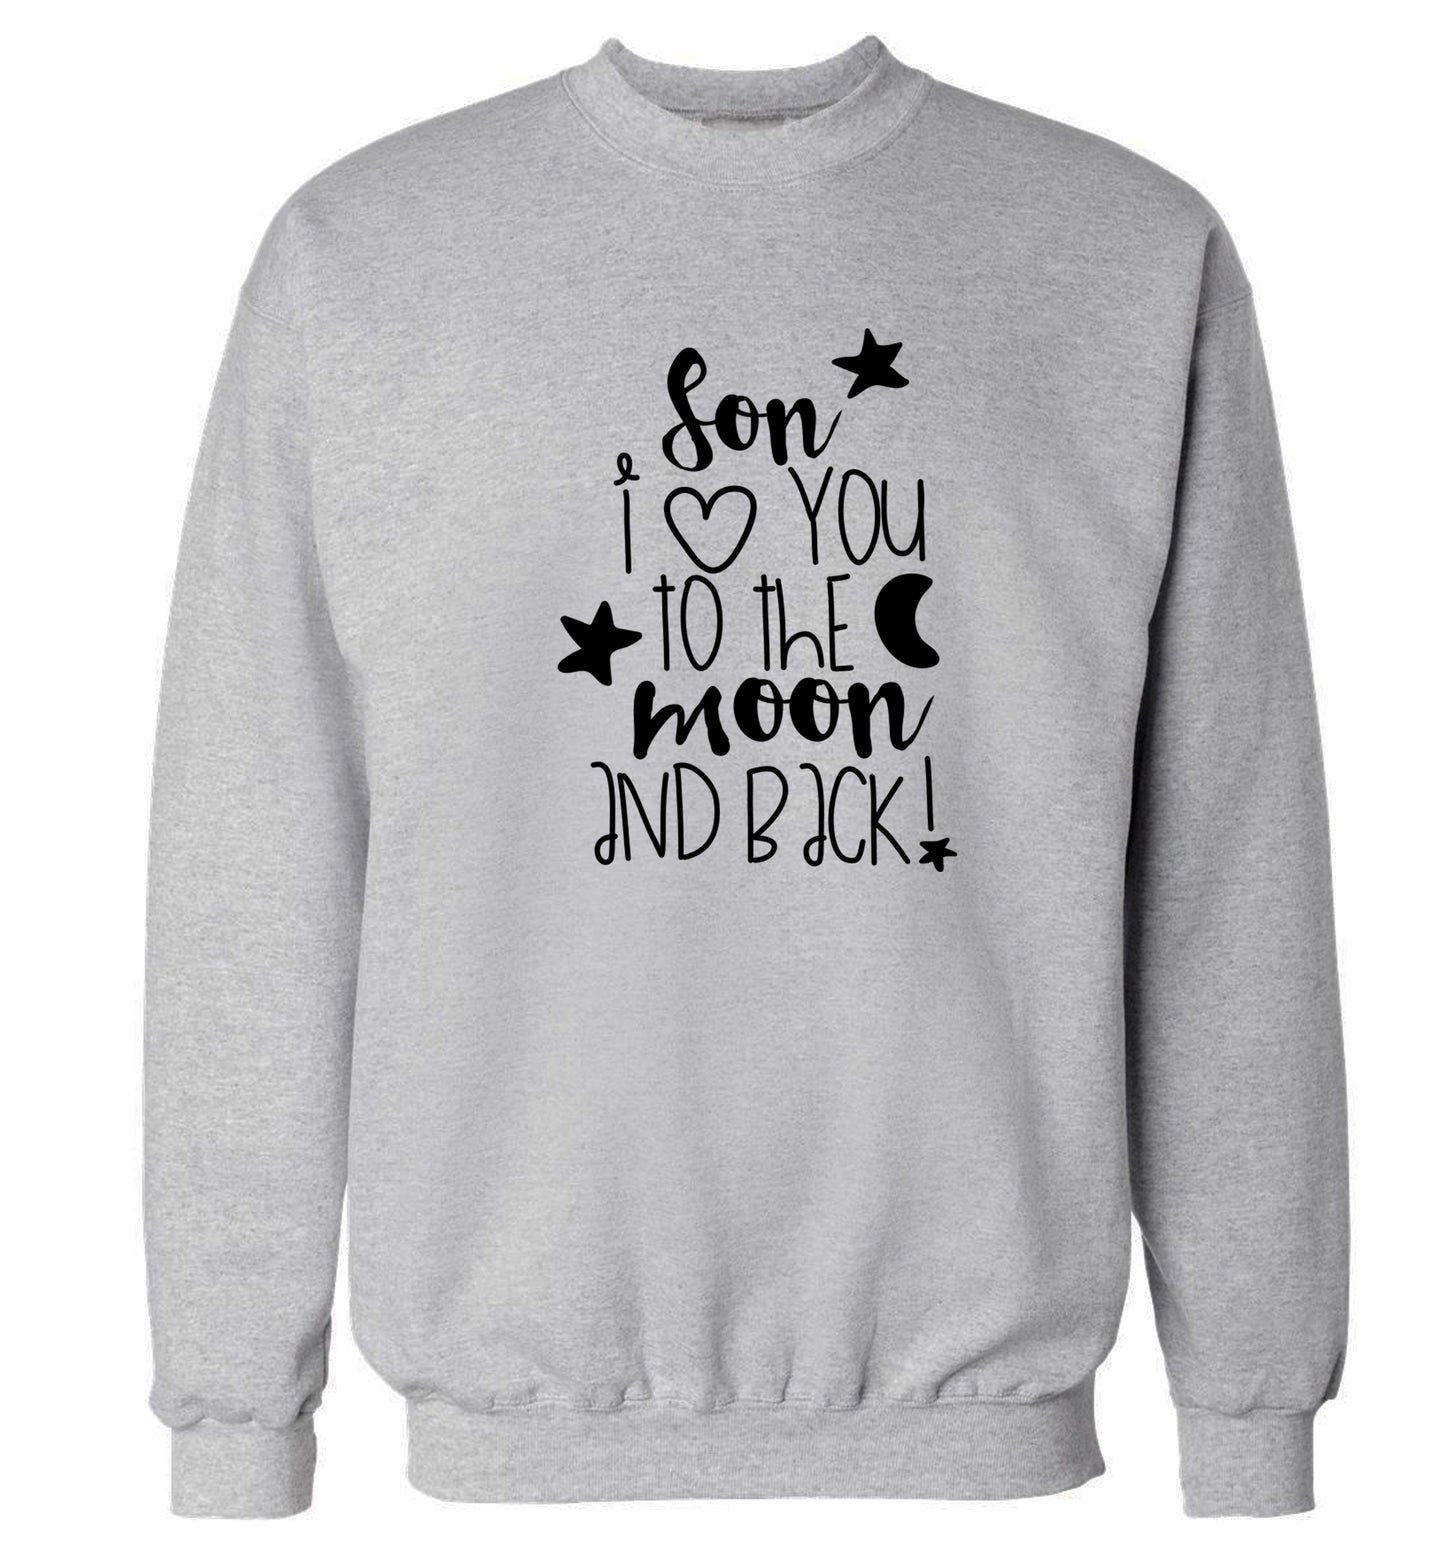 Son I love you to the moon and back Adult's unisex grey  sweater 2XL